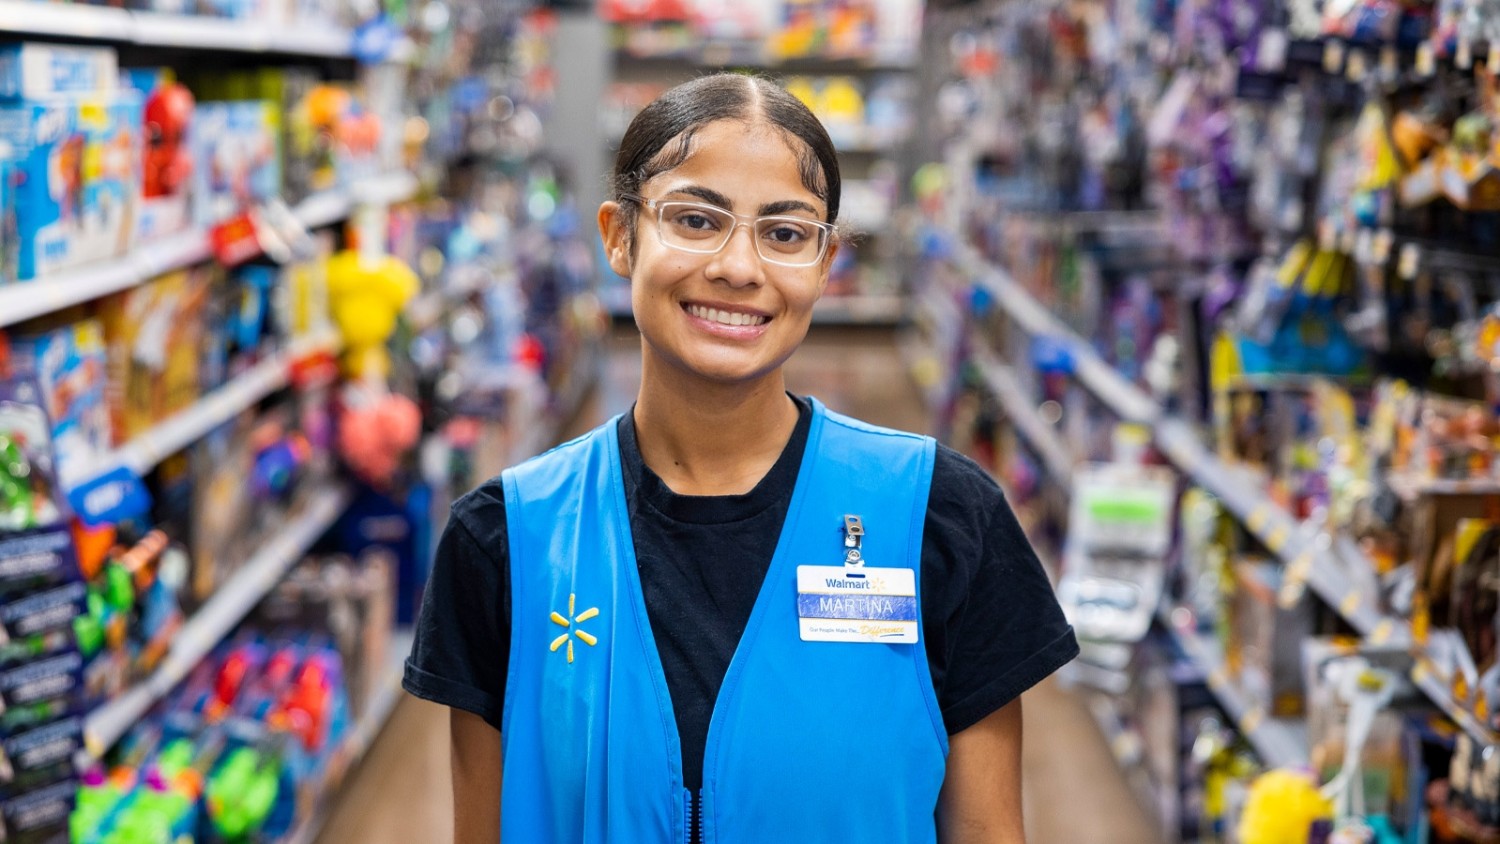 Walmart associate Martina stands in the toy section of her store.